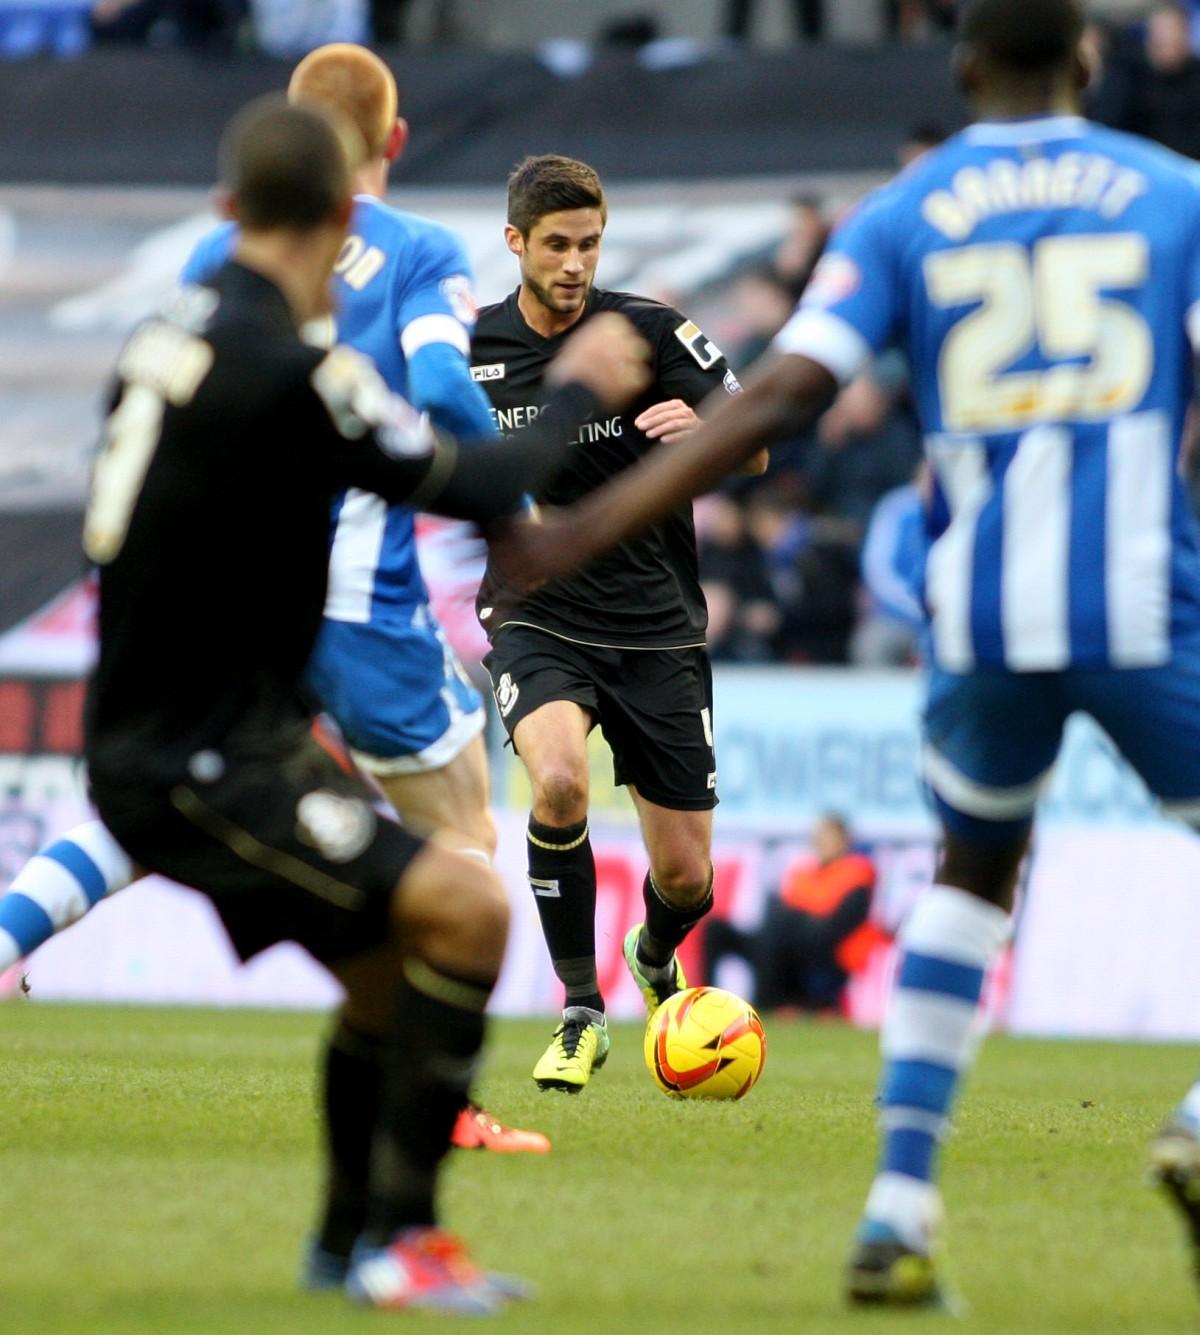 Wigan Athletic v AFC Bournemouth at the DW Stadium on 11th January, 2014